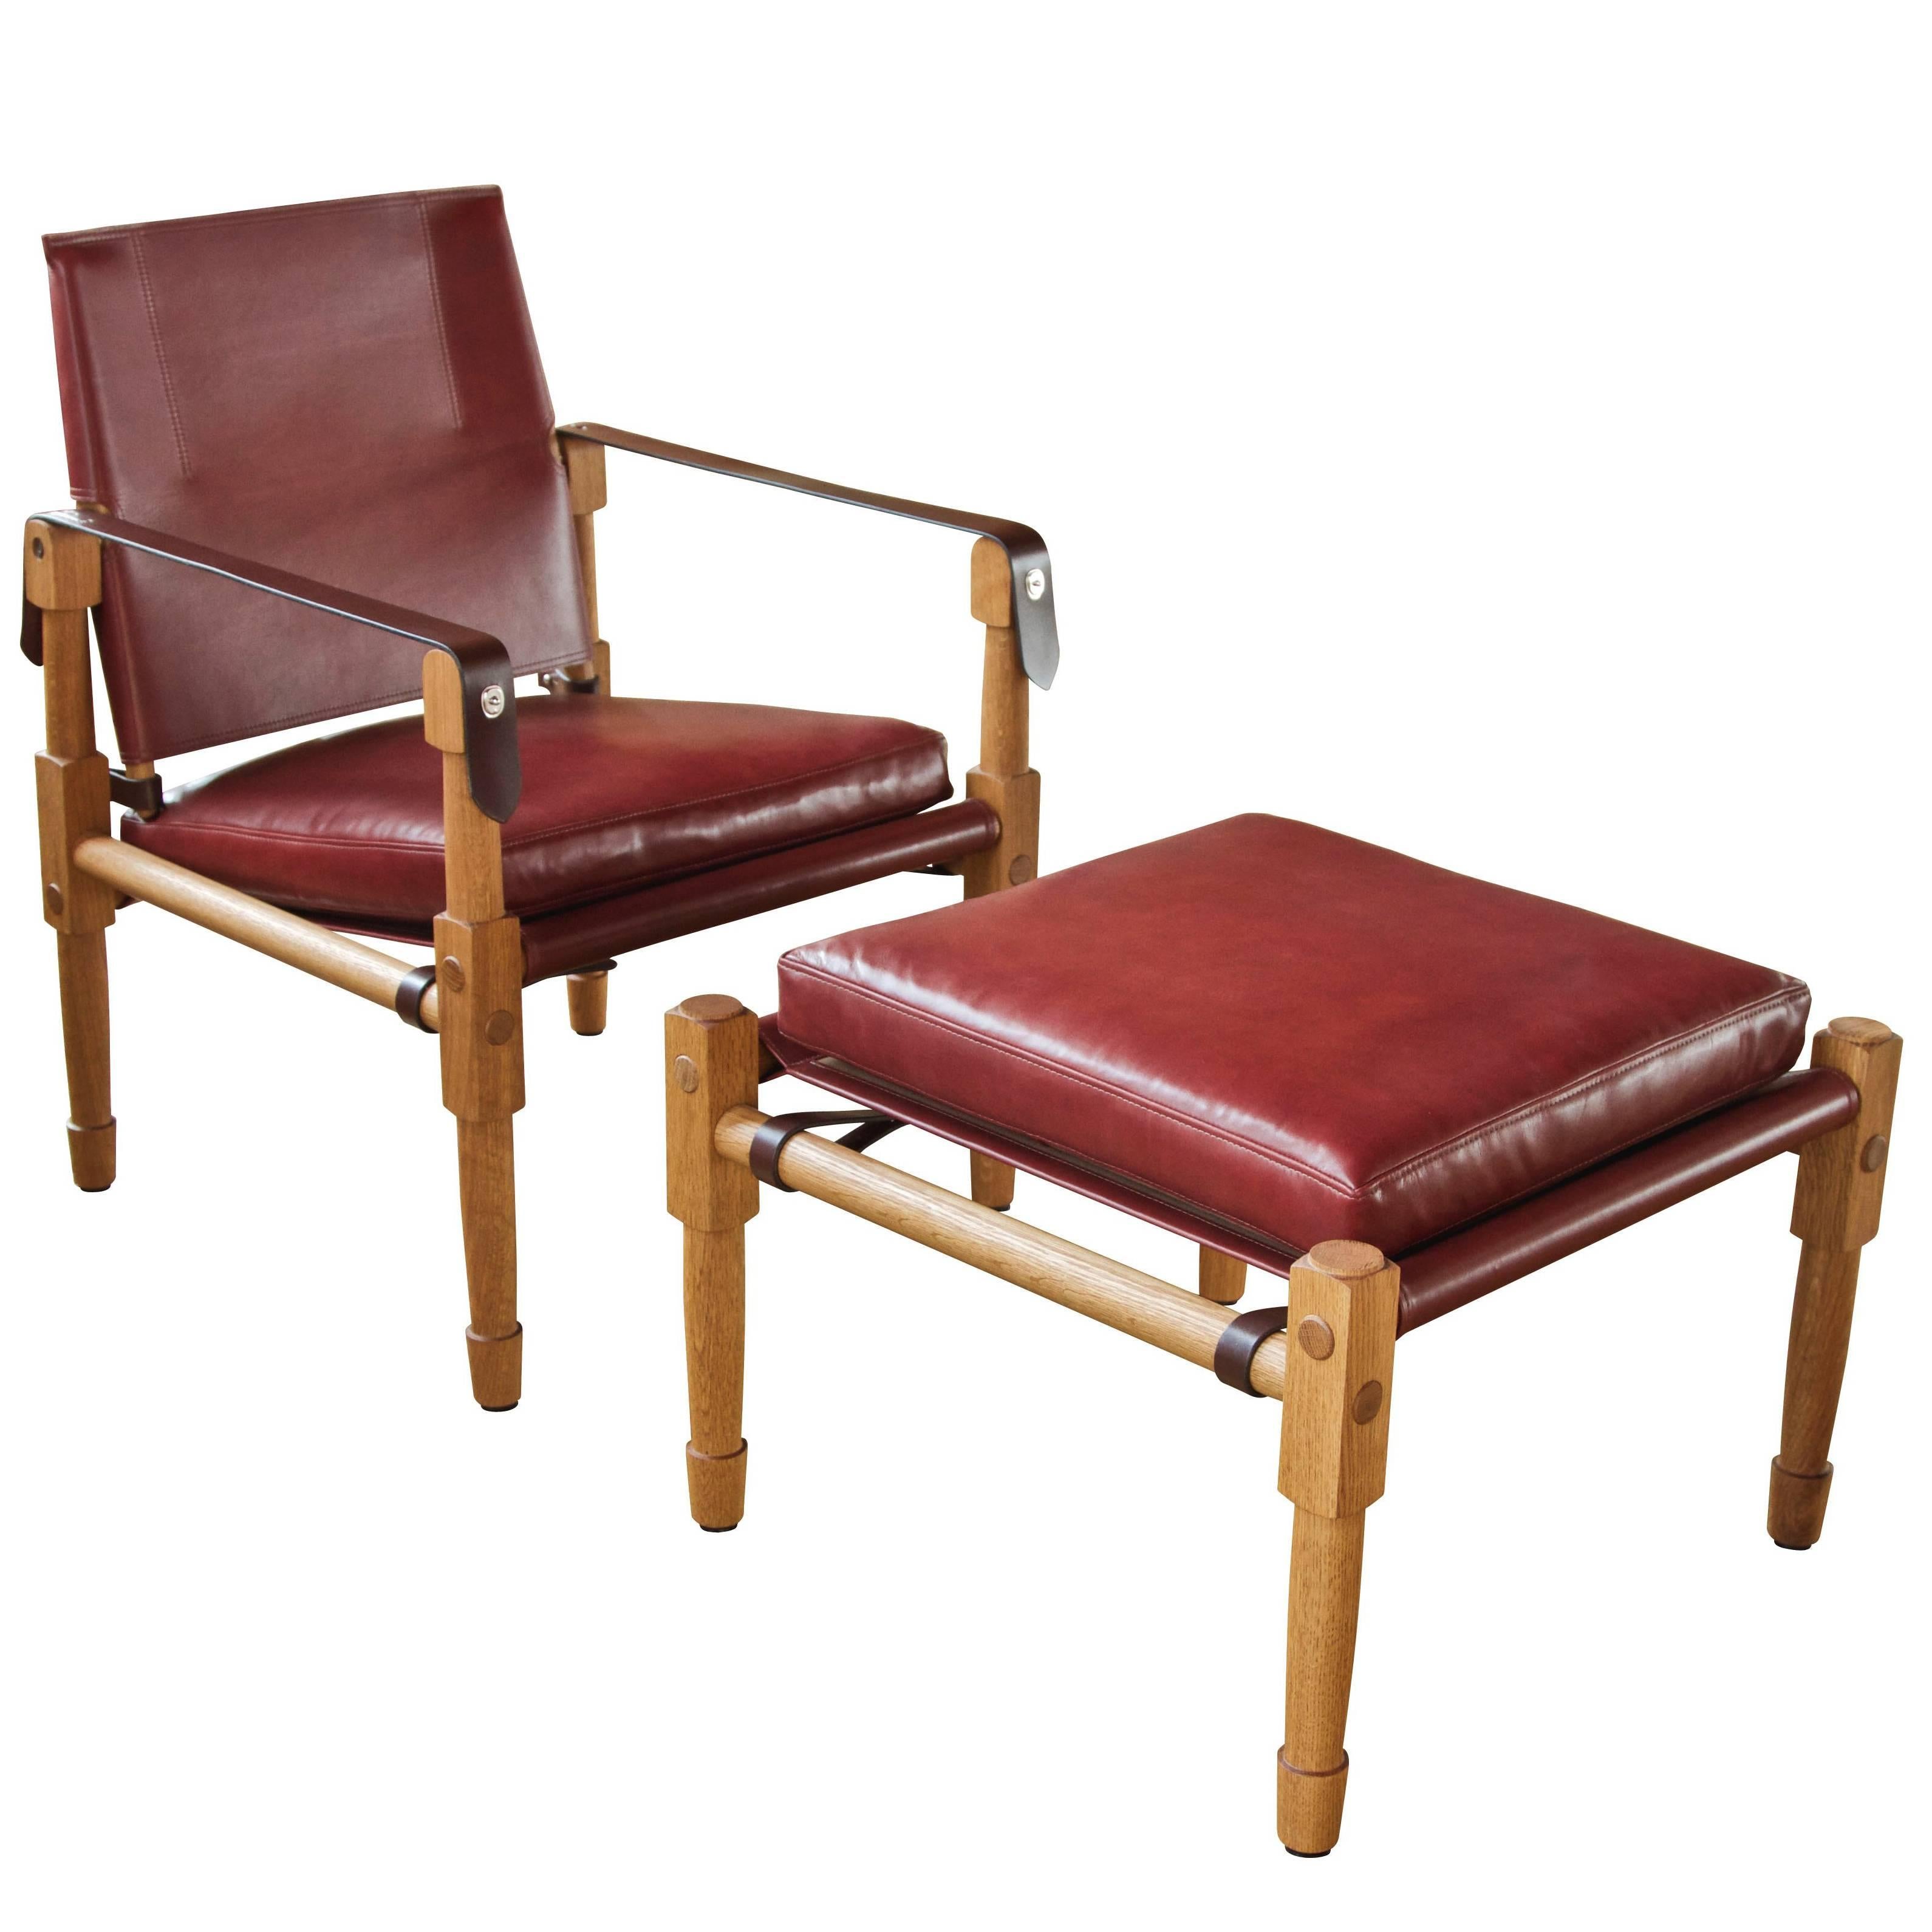 Chatwin Lounge Chair and Ottoman - handcrafted by Richard Wrightman Design